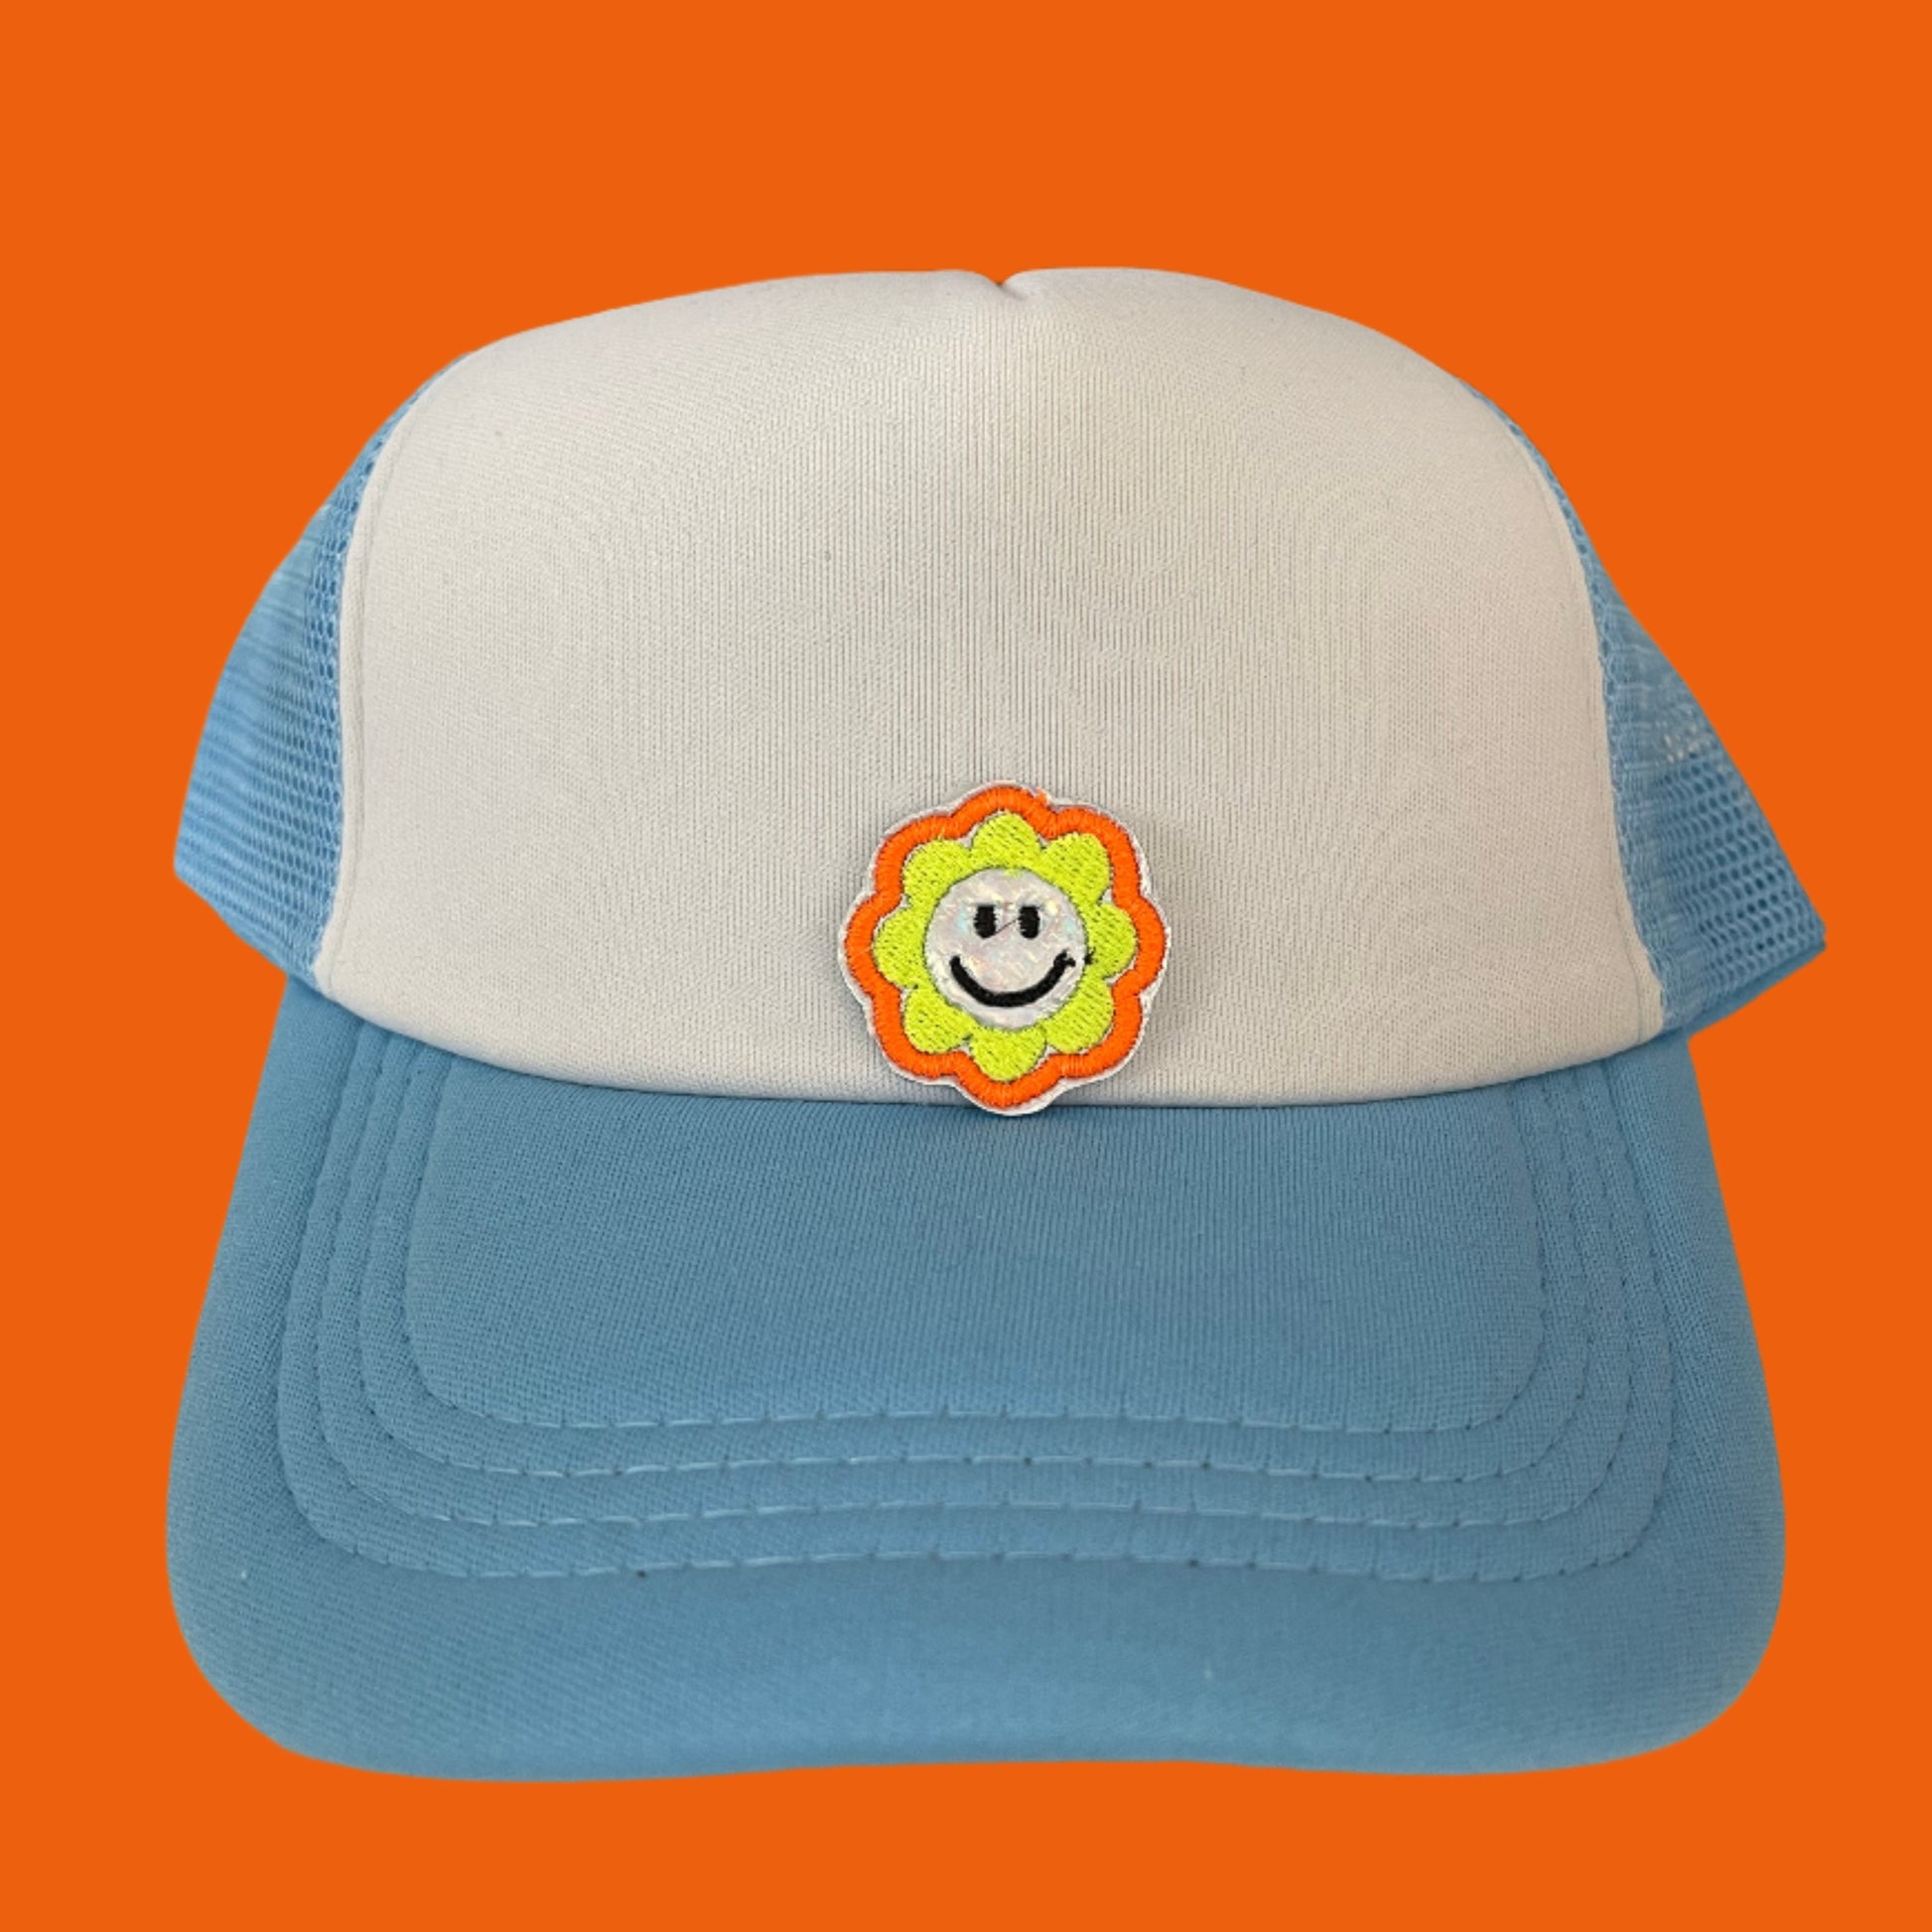 Close-up of a Bright Smiley Flower embroidered patch featuring a cheerful yellow smiley face surrounded by a colorful flower, perfect for customizing hats, apparel, and various accessories.